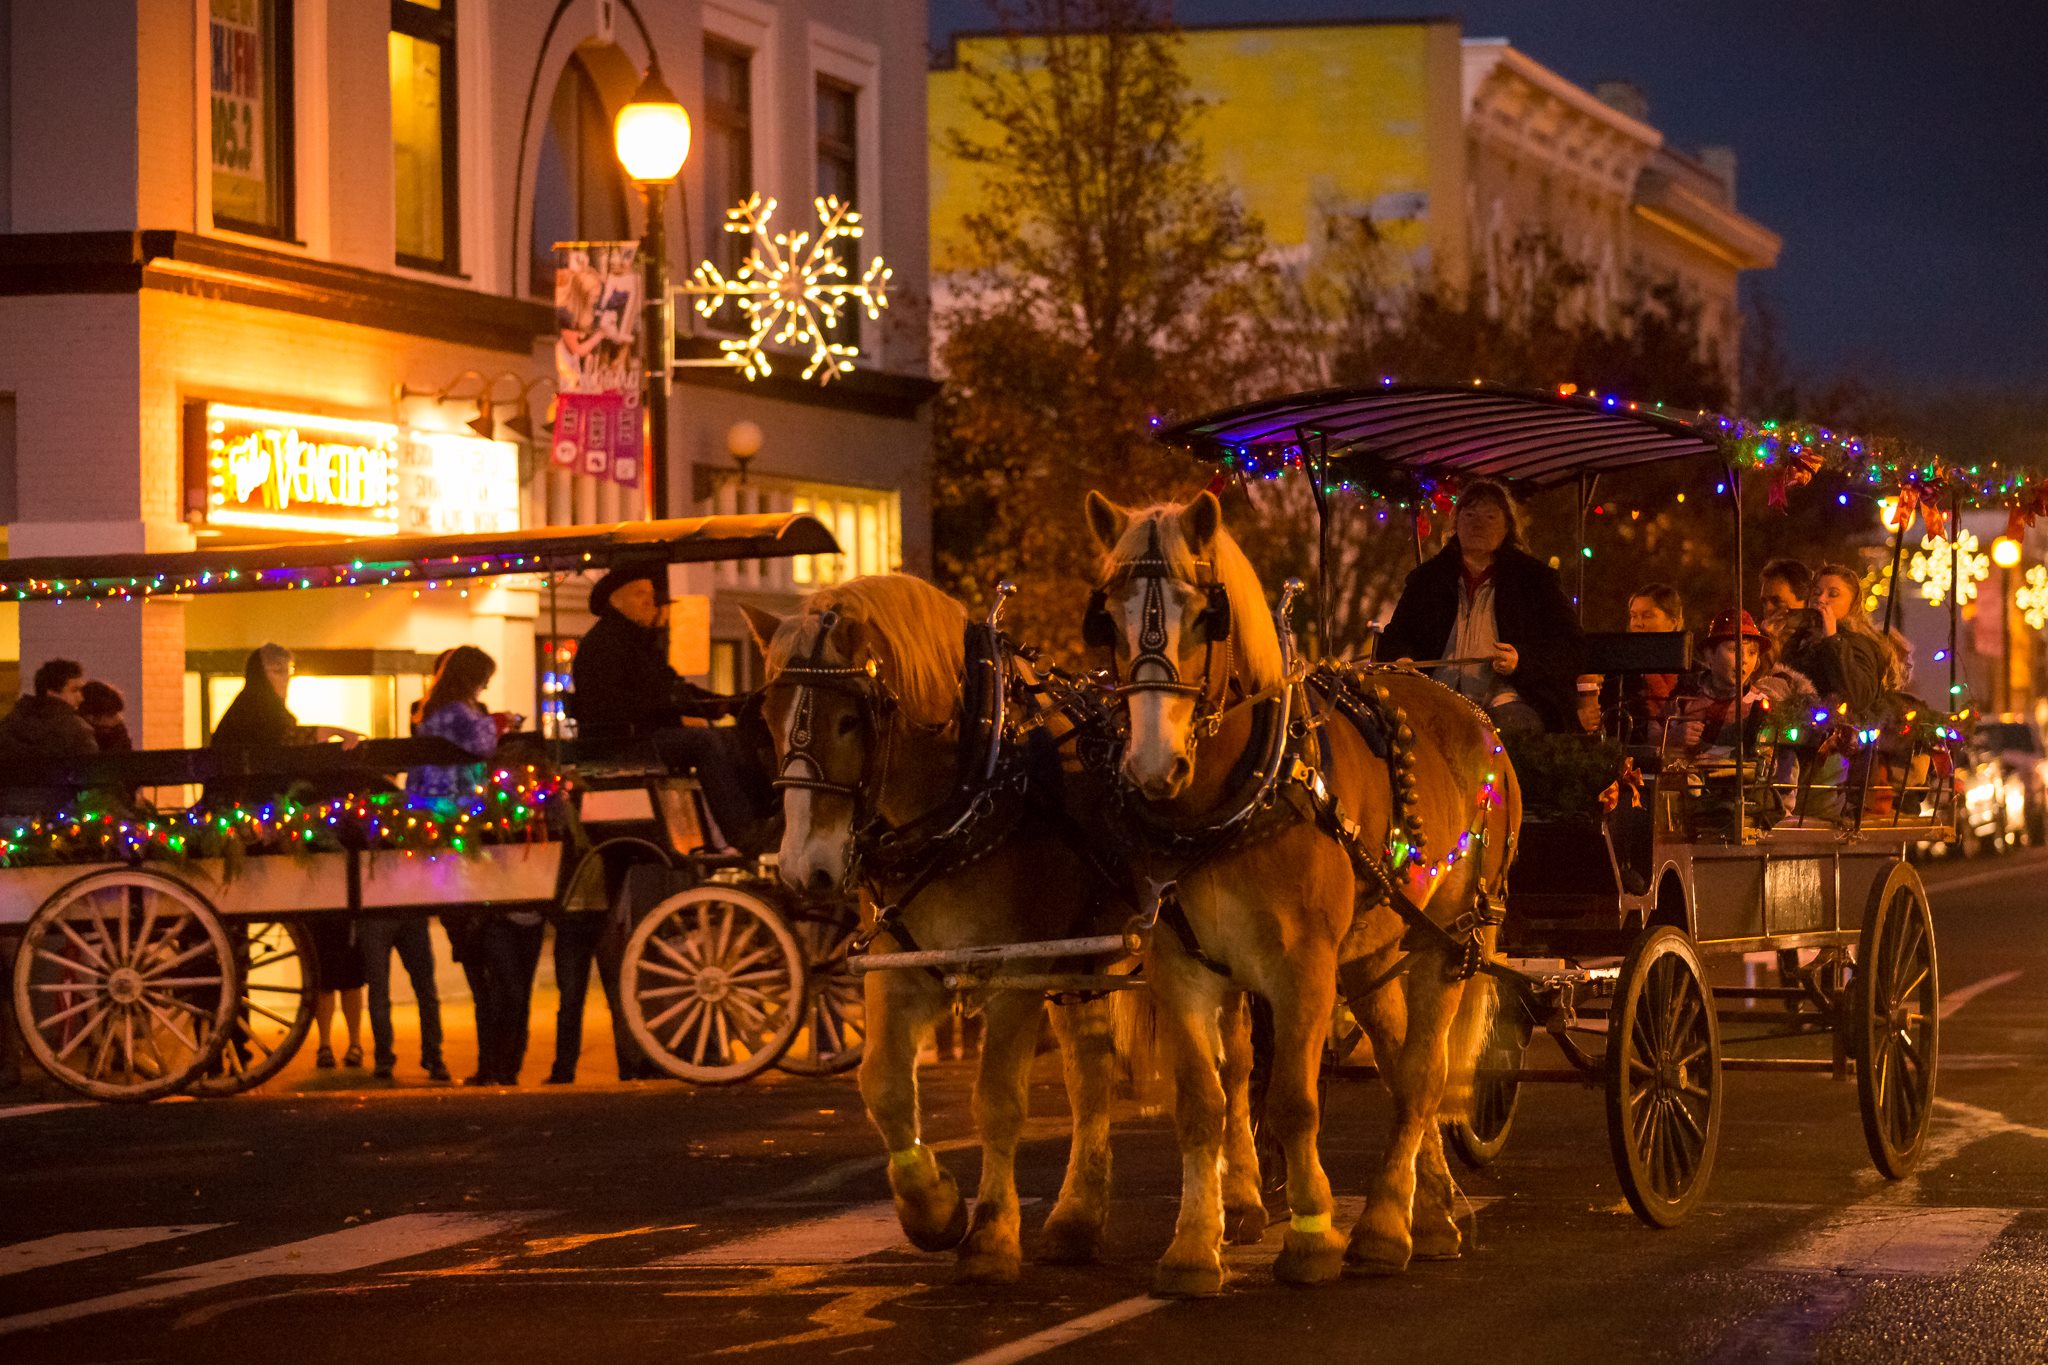 Photo of horse-drawn wagons decorated for Christmas Carling in Albany, OR. Photo by Anthony Shelar